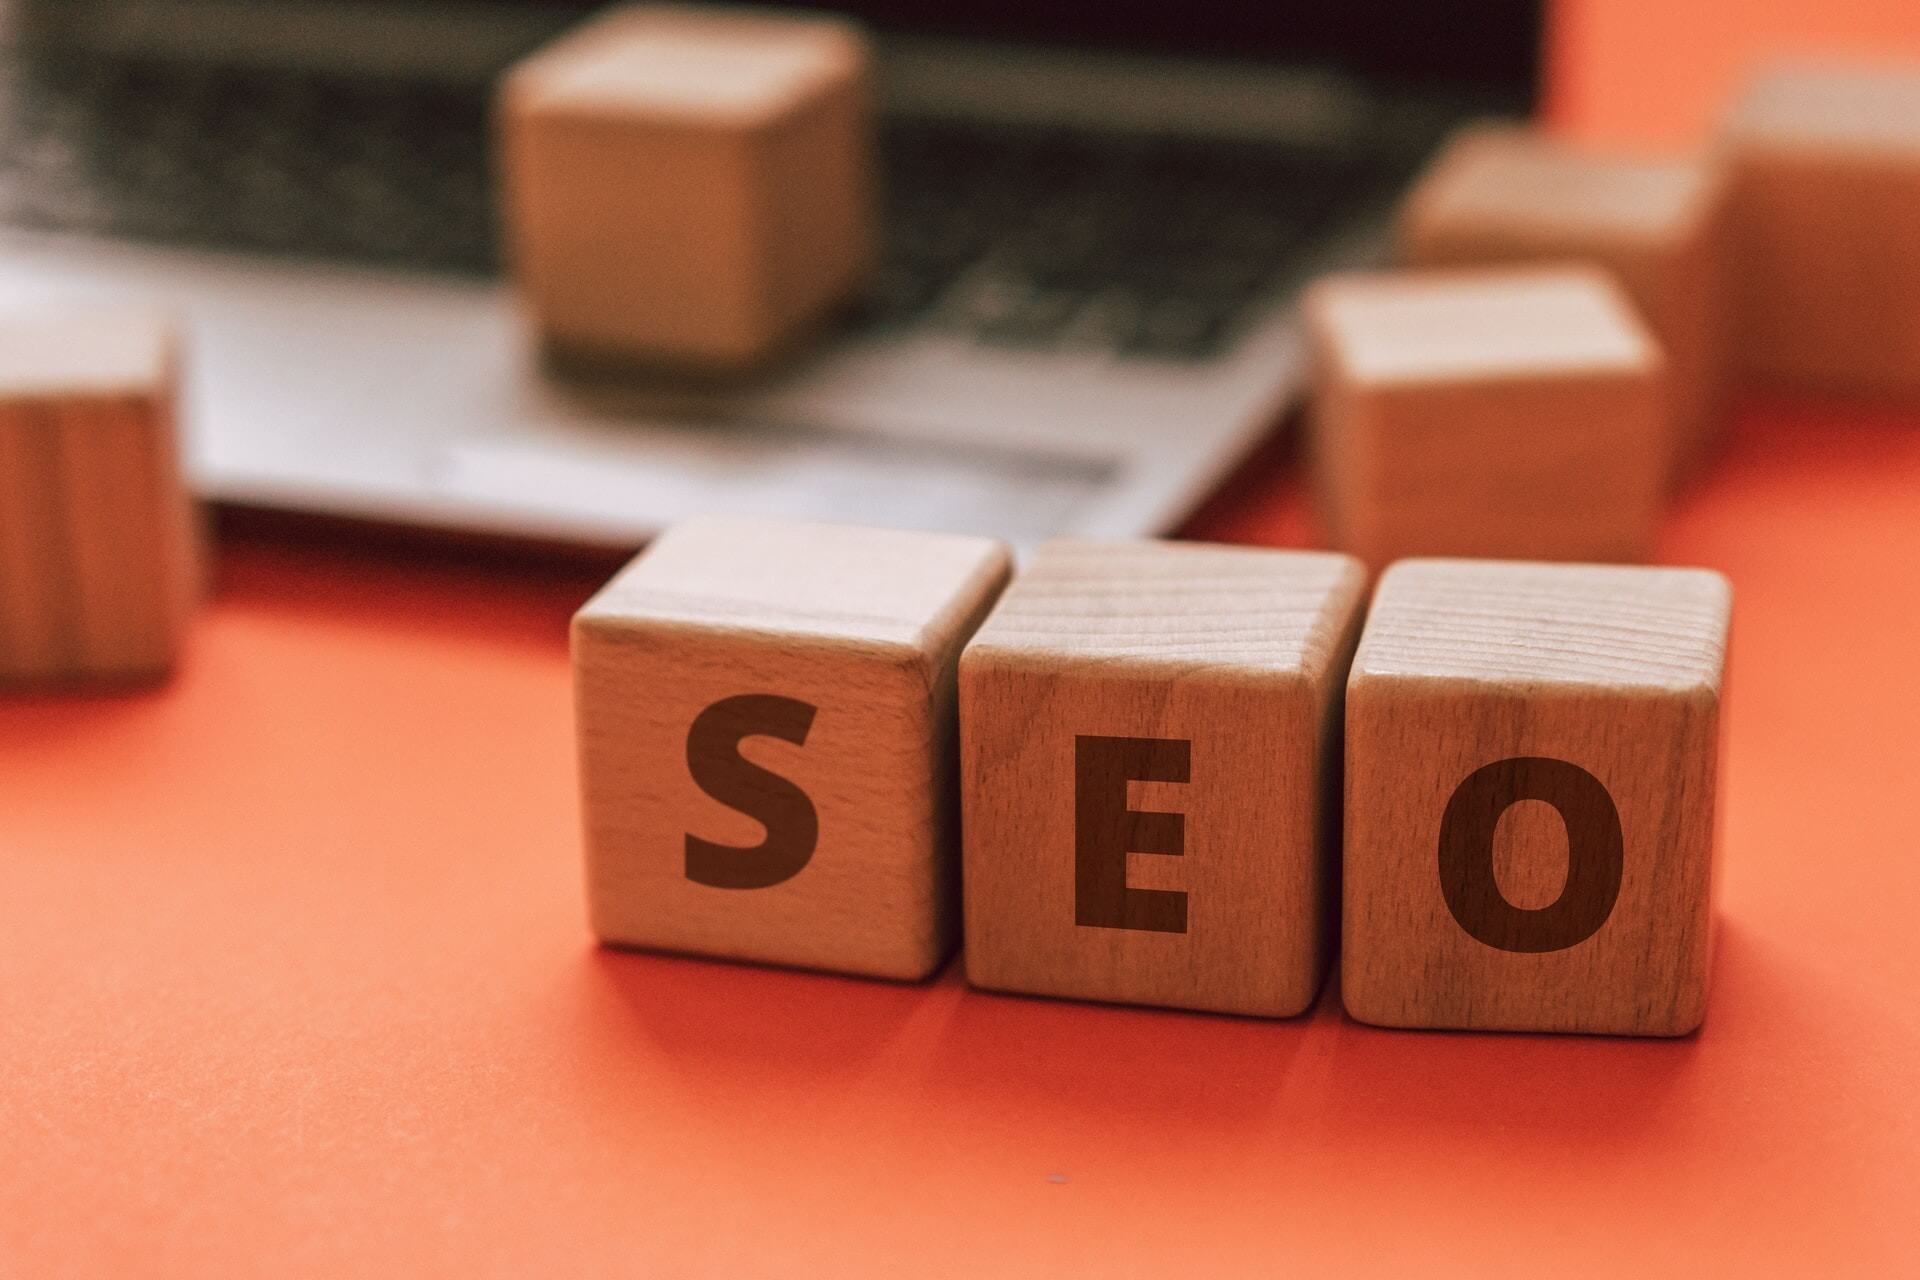 An SEO agency fit to serve any business